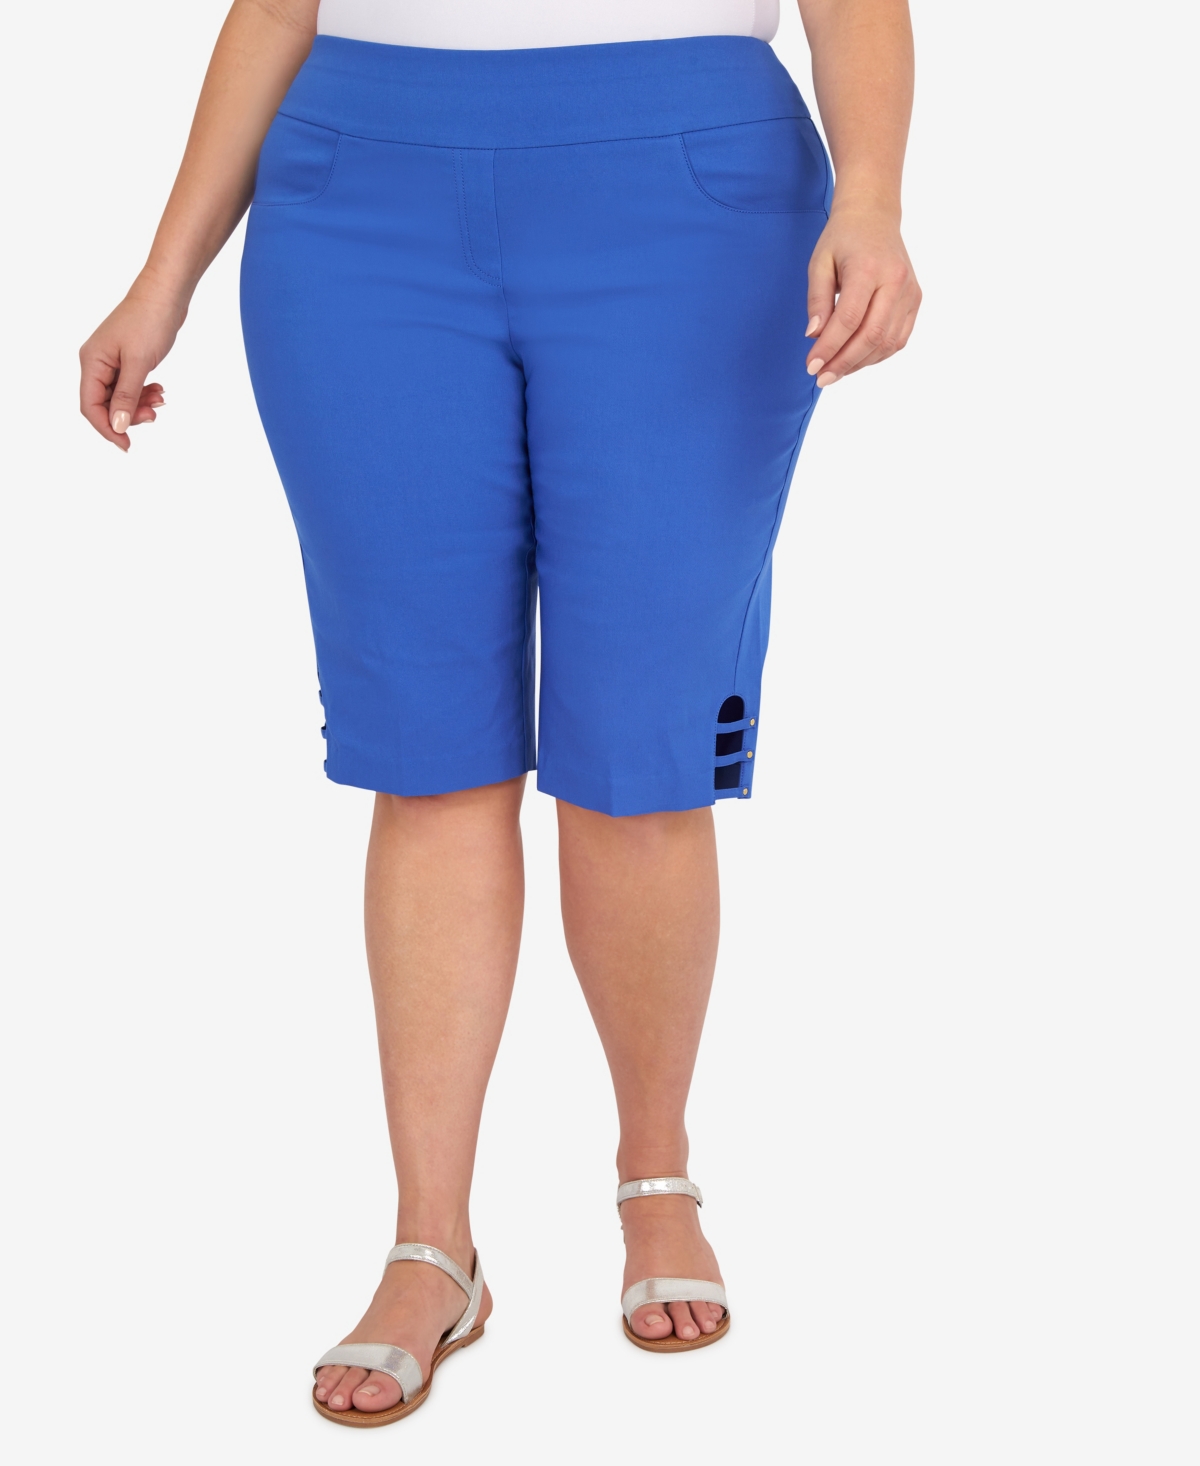 Hearts Of Palm Plus Size It's Up To Solid Tech Stretch Skimmer Shorts